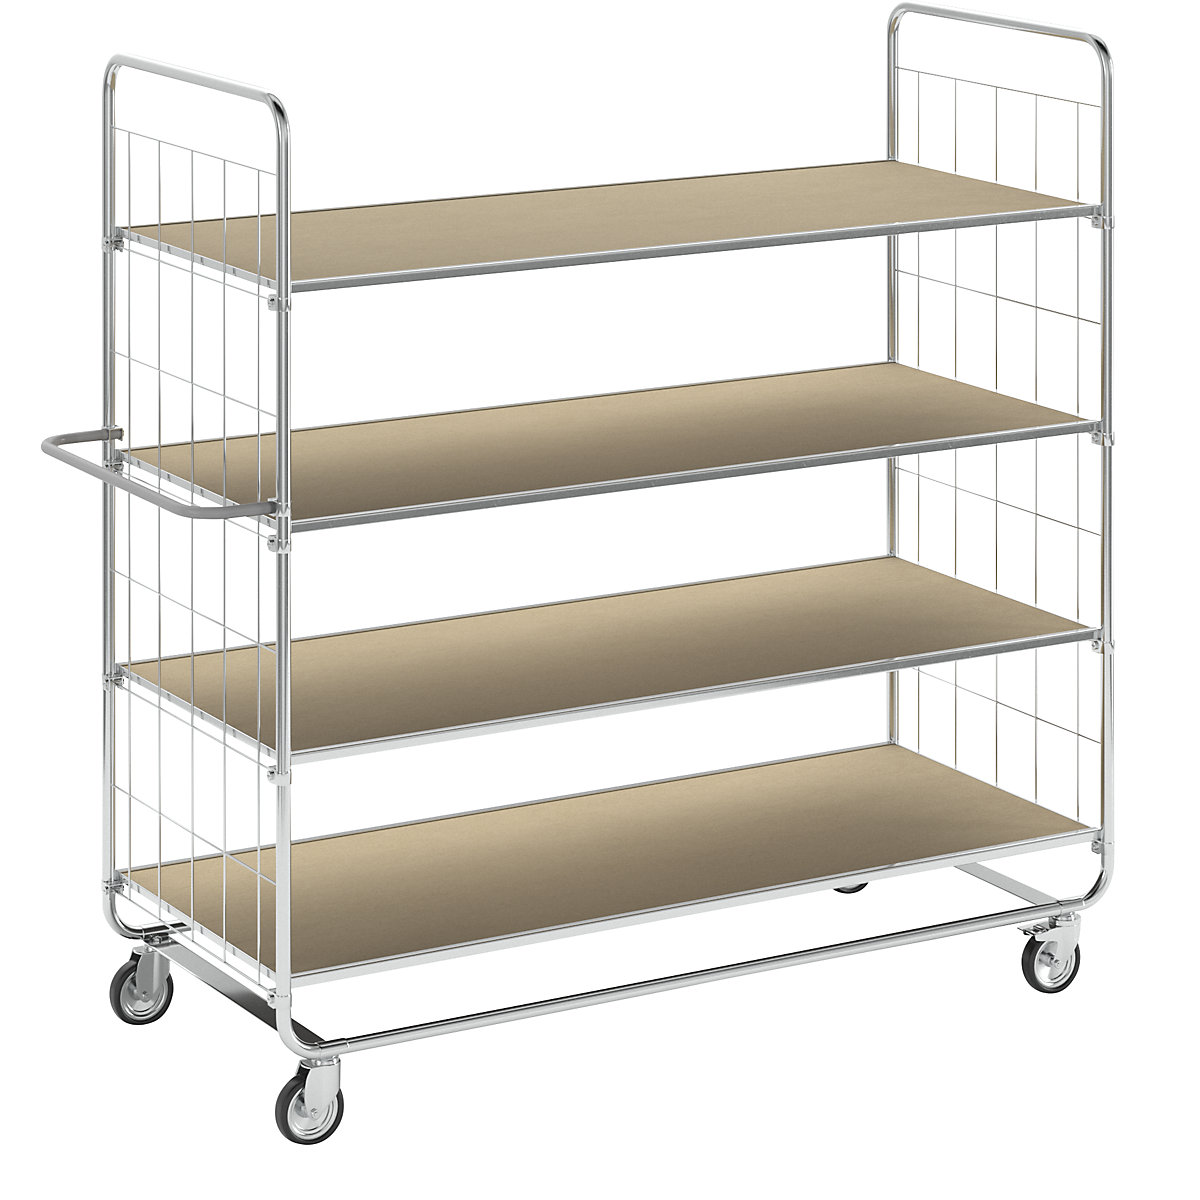 ESD shelf truck, with 4 shelves – Kongamek, 4 castors, 2 with stops, LxWxH 1195 x 470 x 1120 mm, 2+ items-11